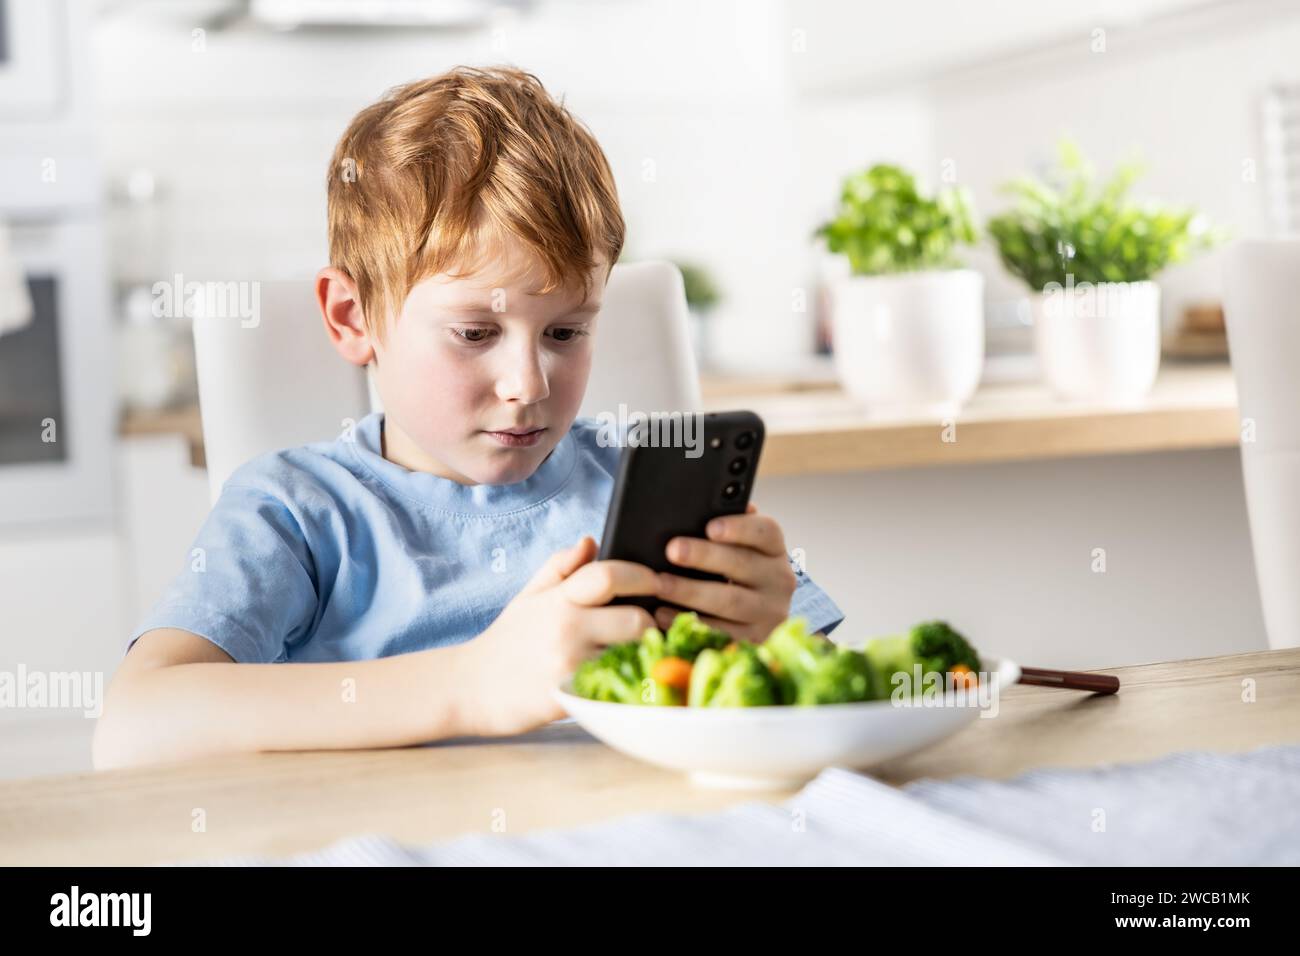 View of smart cute boy using smartphone before lunch in kitchen at home. Stock Photo